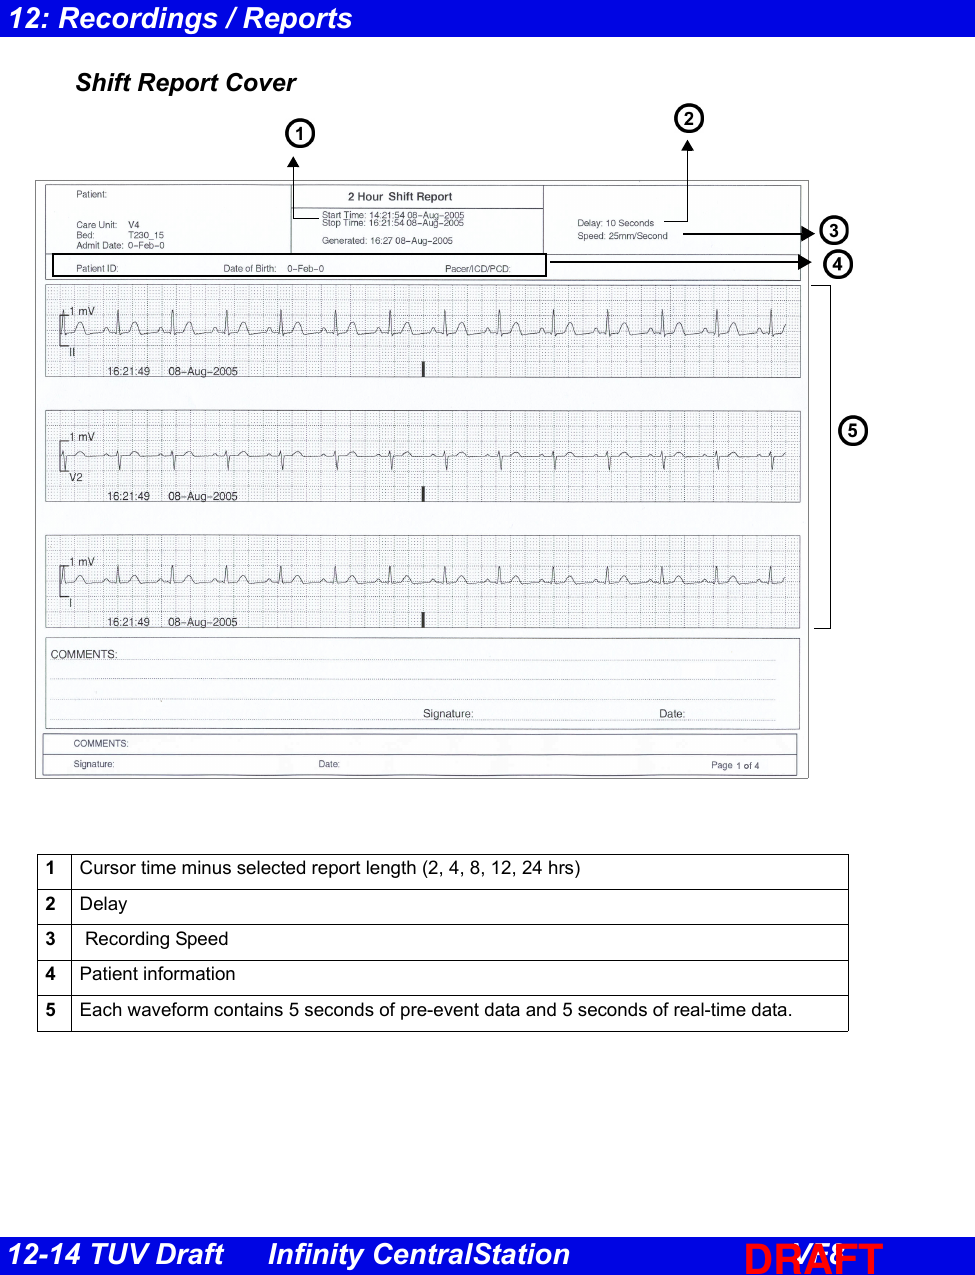 12-14 TUV Draft Infinity CentralStation VF812: Recordings / ReportsShift Report Cover1Cursor time minus selected report length (2, 4, 8, 12, 24 hrs) 2Delay3 Recording Speed4Patient information5Each waveform contains 5 seconds of pre-event data and 5 seconds of real-time data. DRAFT